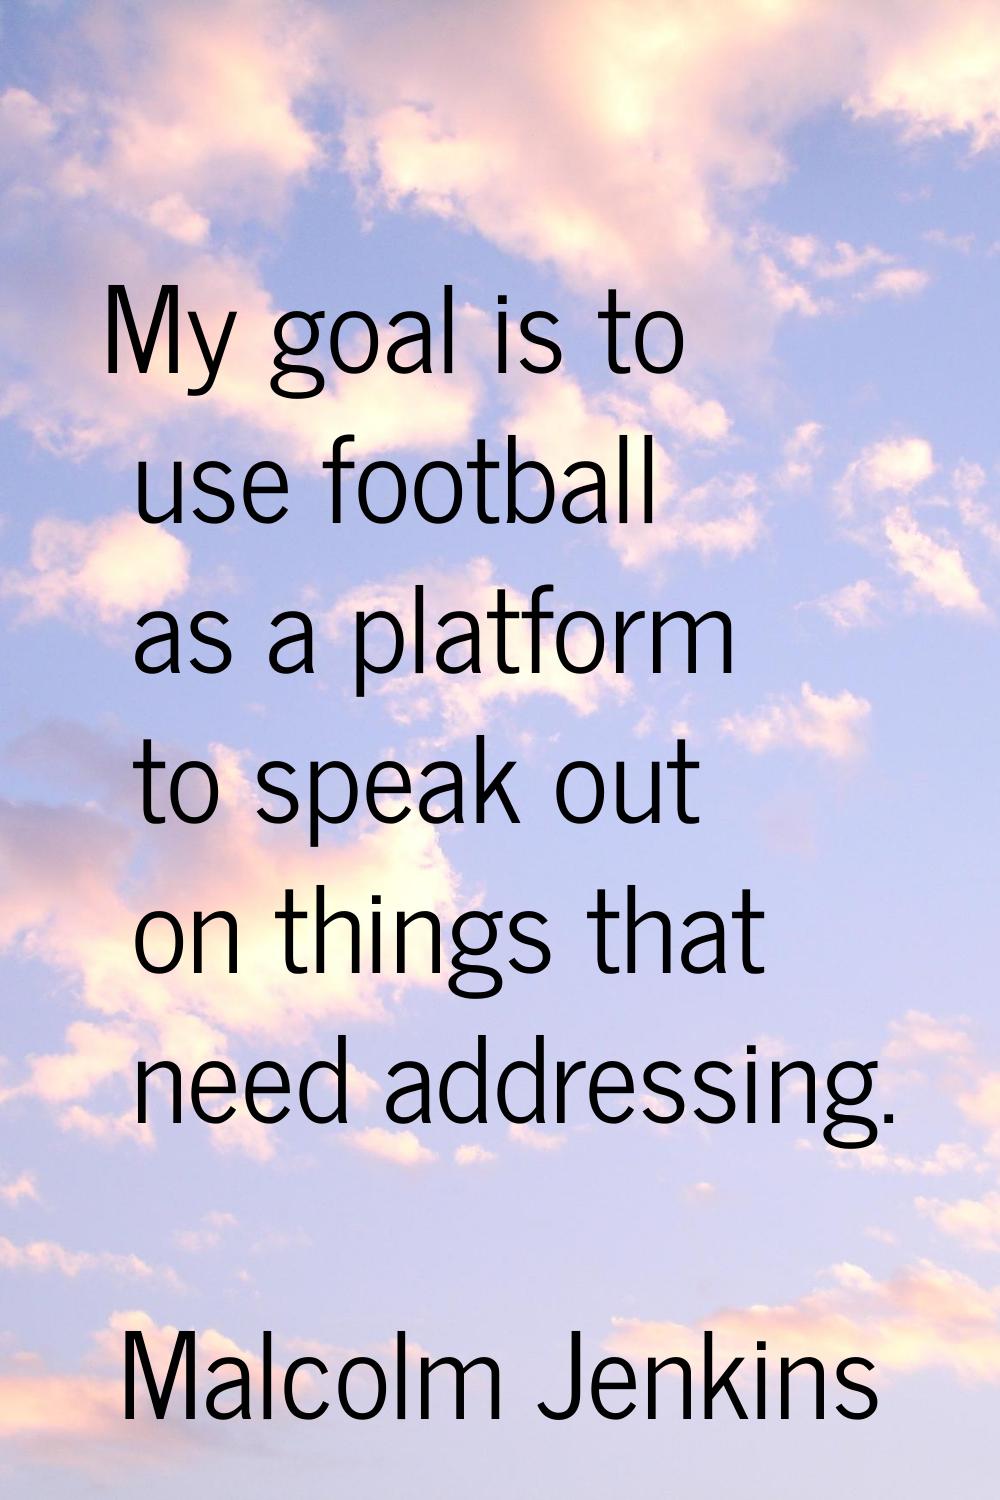 My goal is to use football as a platform to speak out on things that need addressing.